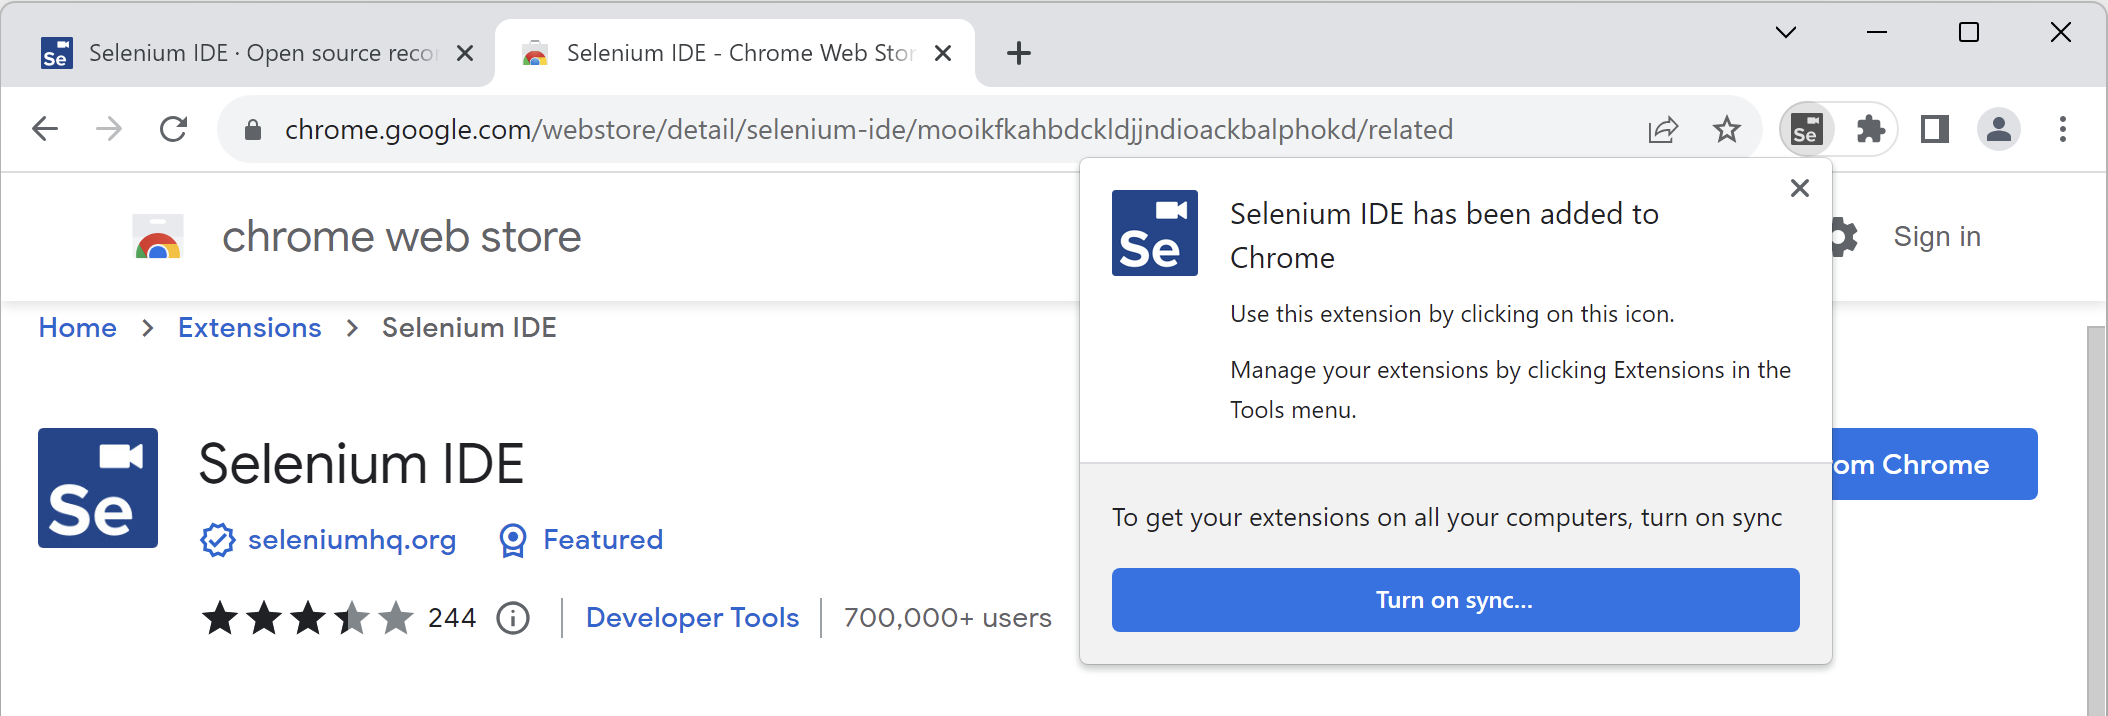 selenium ide has been added to chrome